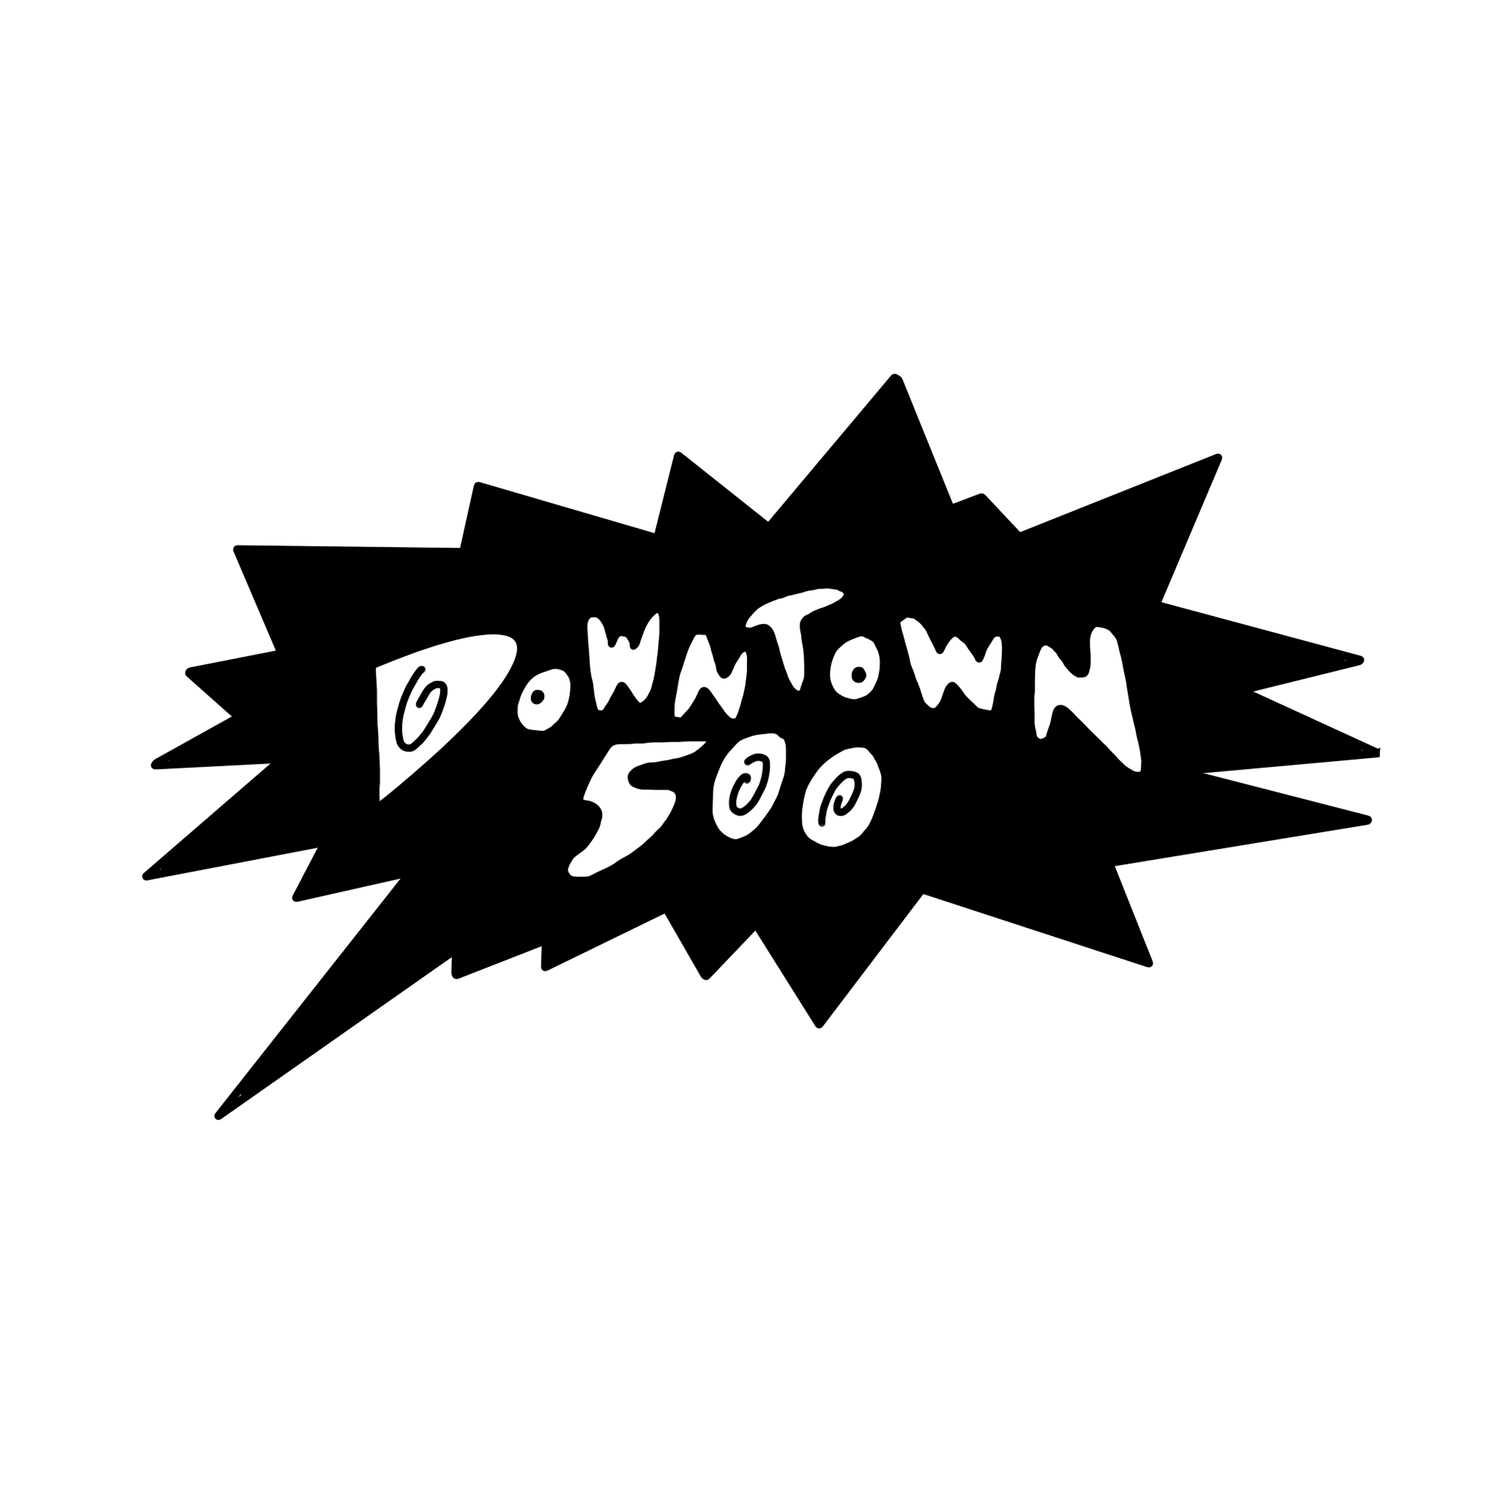 Downtown 500